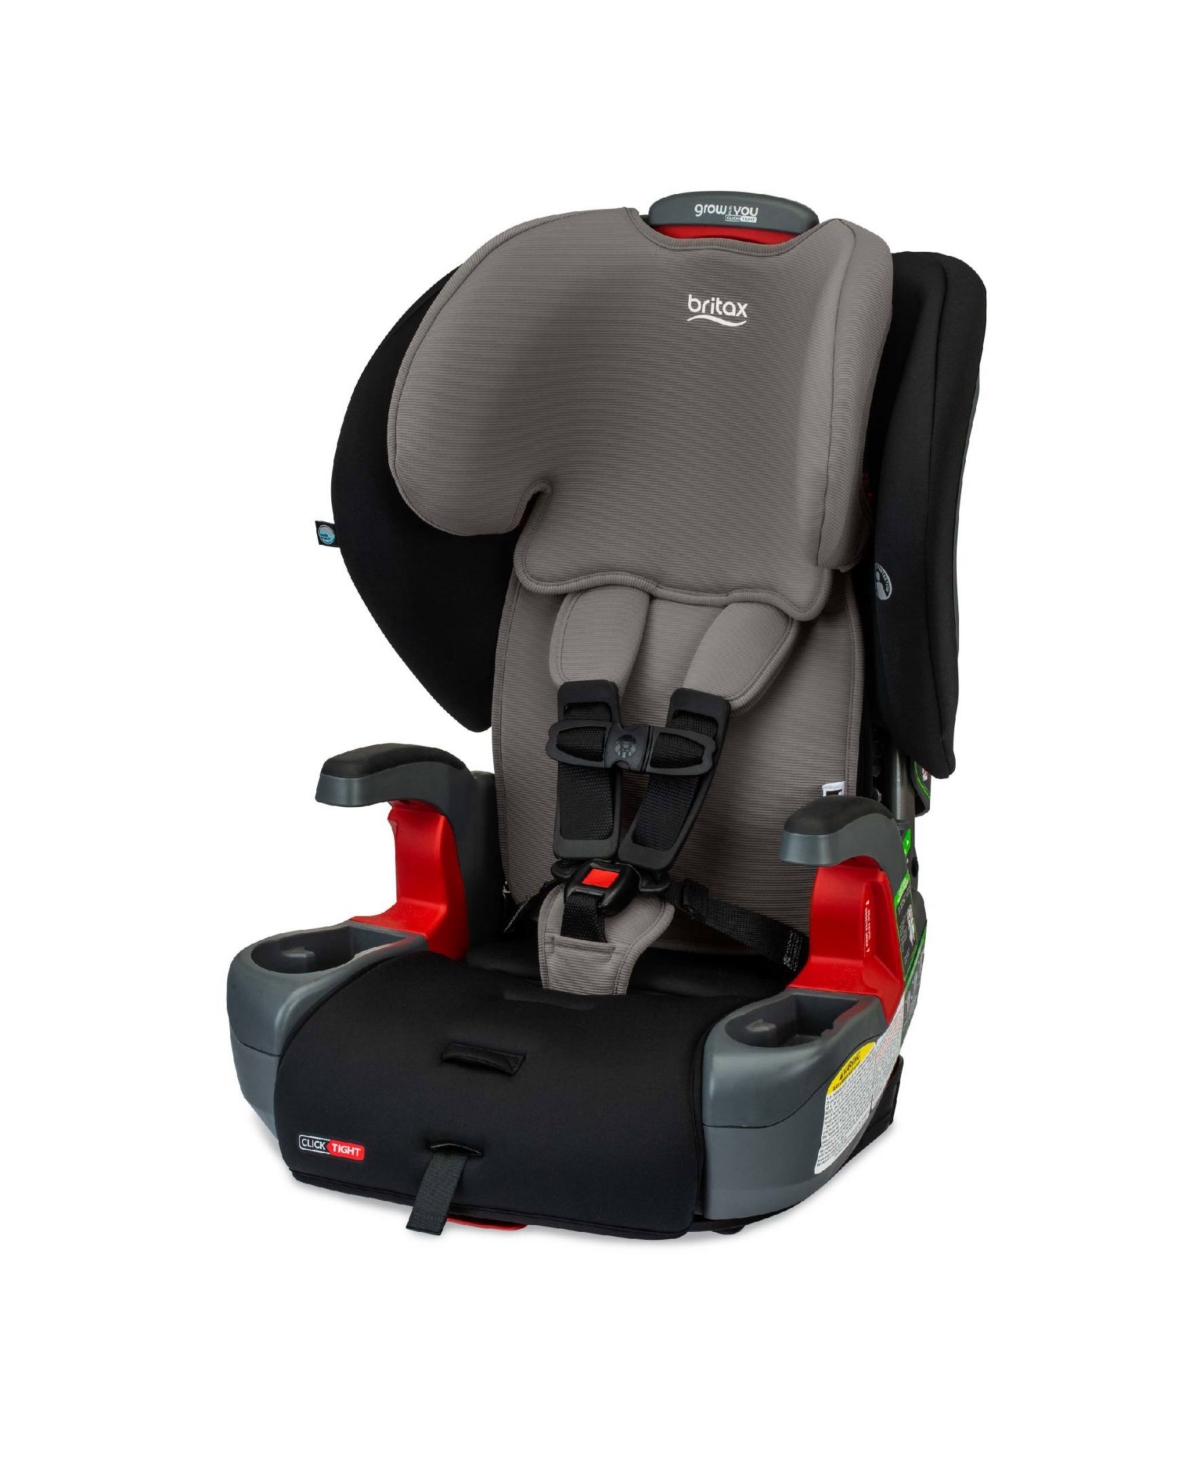 Britax Grow With You Click Tight Harness-2-booster In Gray Contour